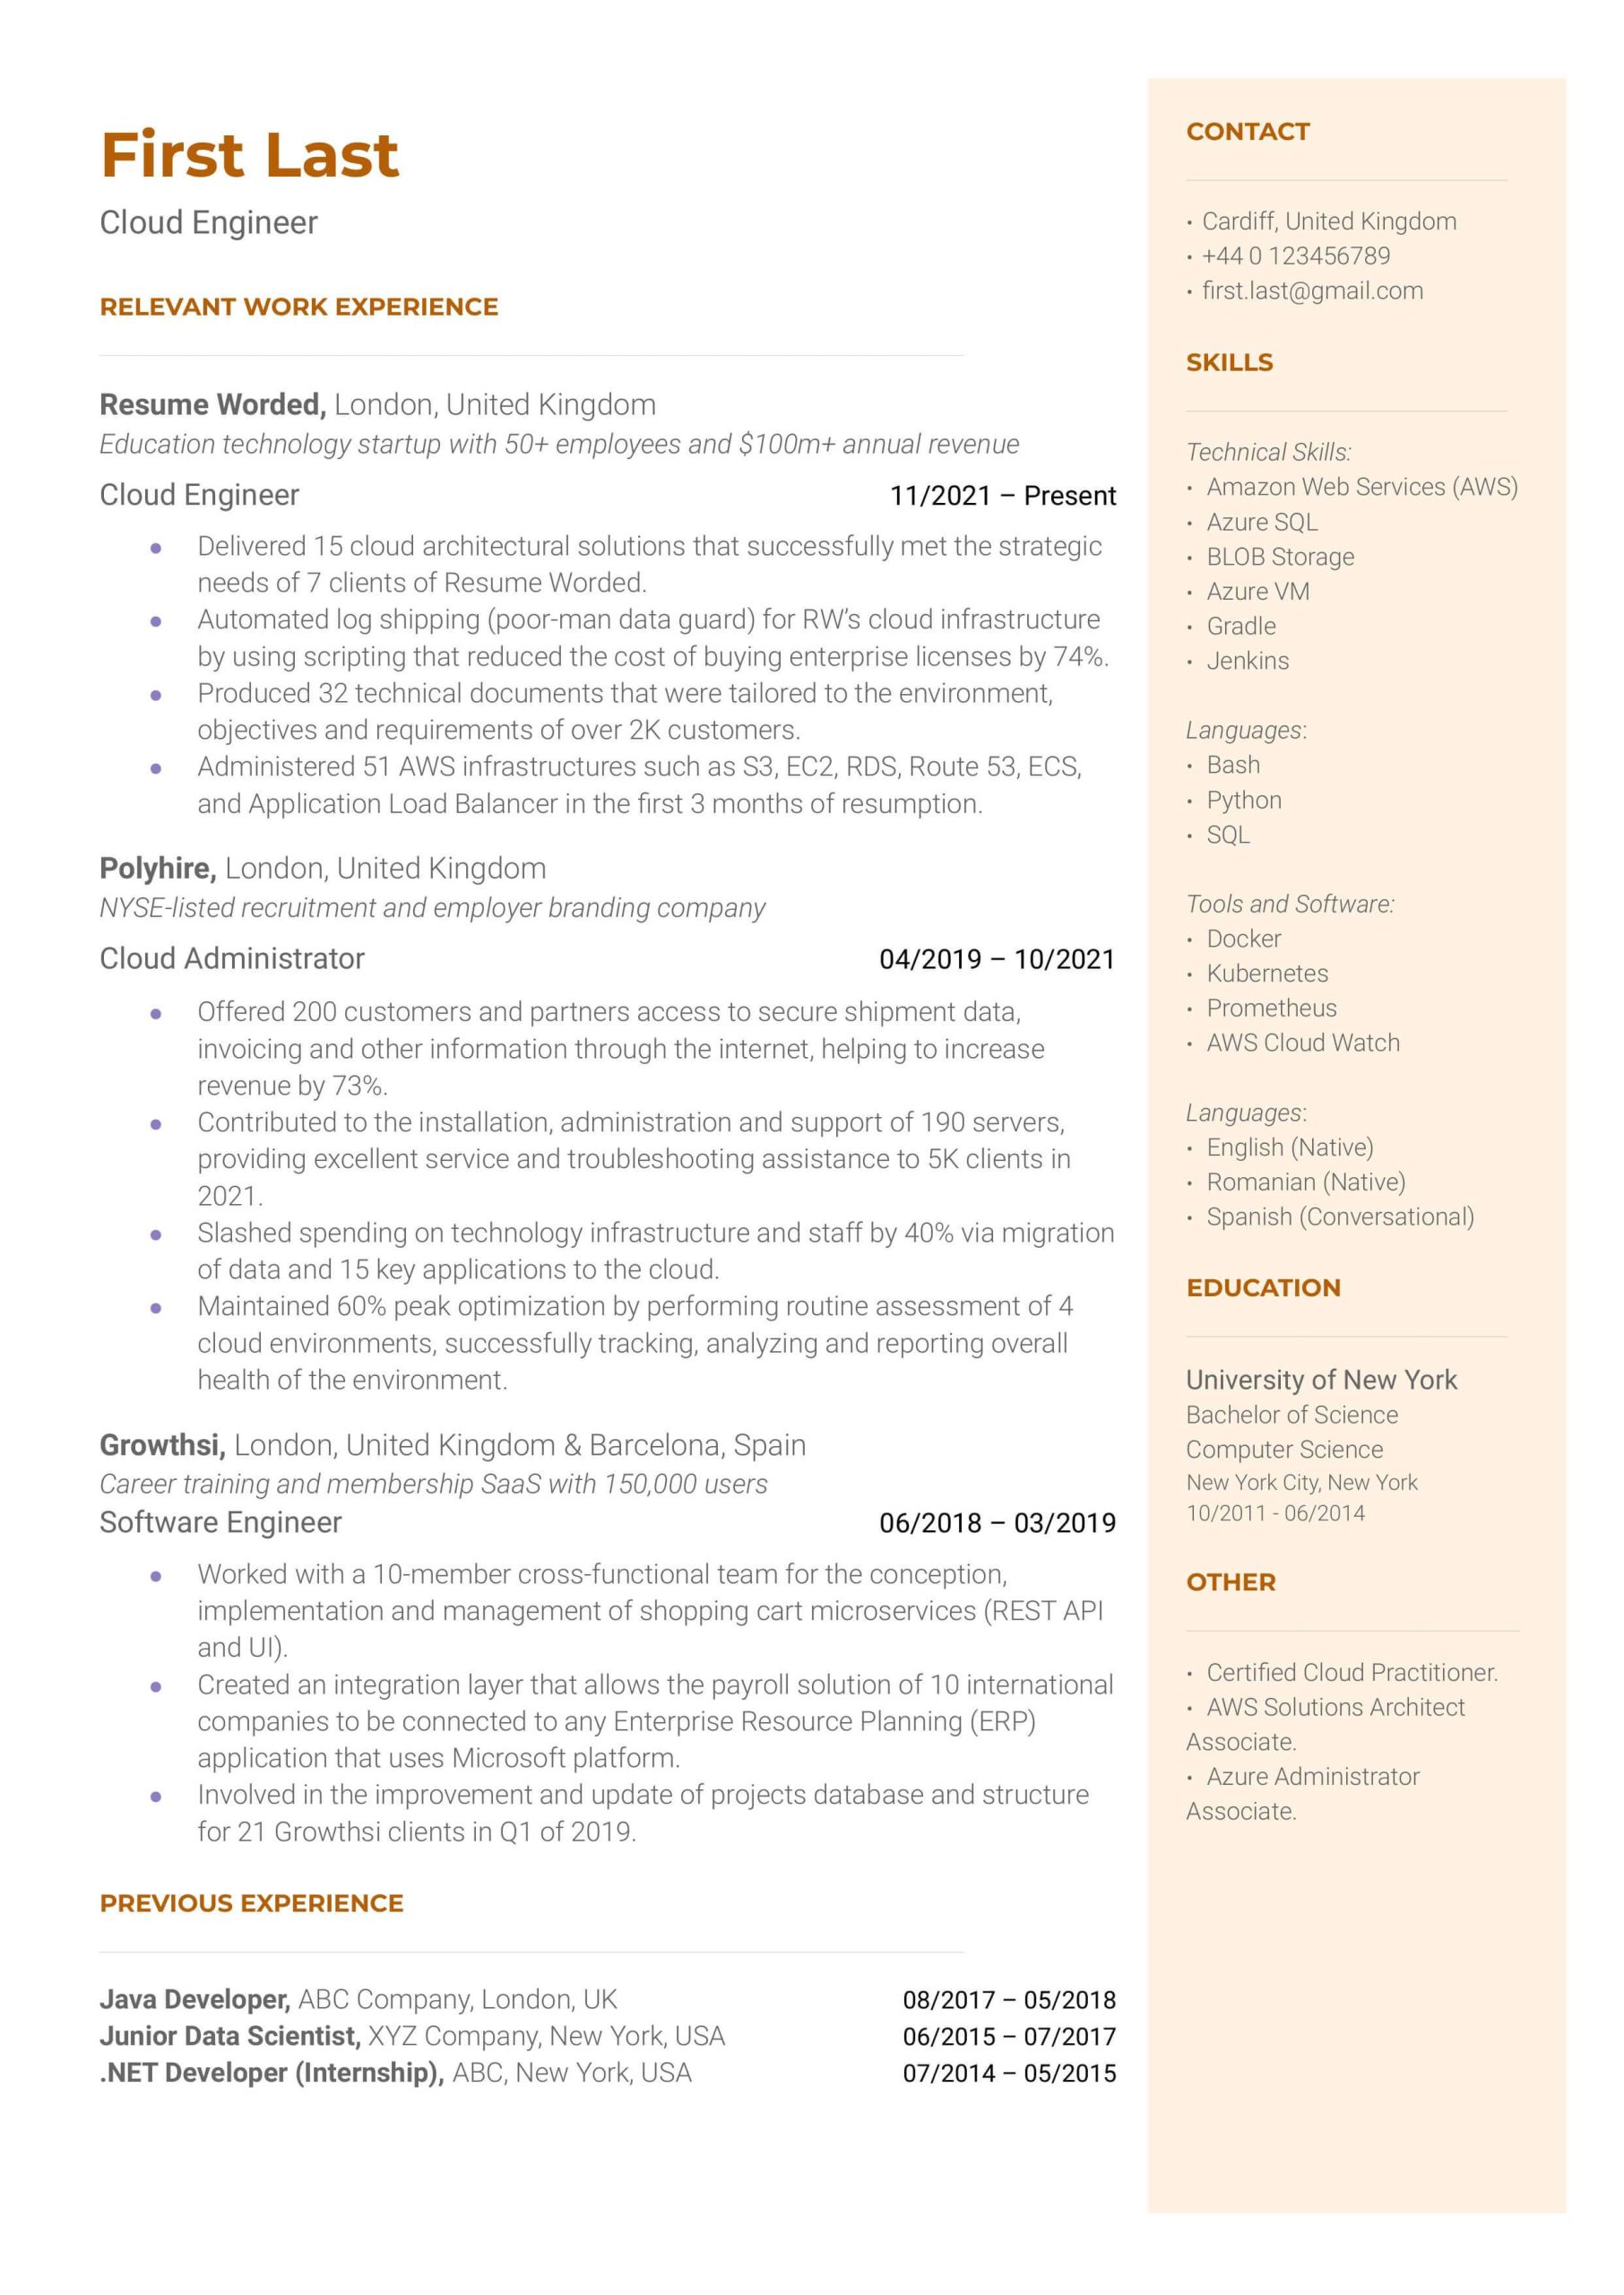 Basic Amazon Cloud Technician Resume Sample 5 Cloud Engineer Resume Examples for 2022 Resume Worded